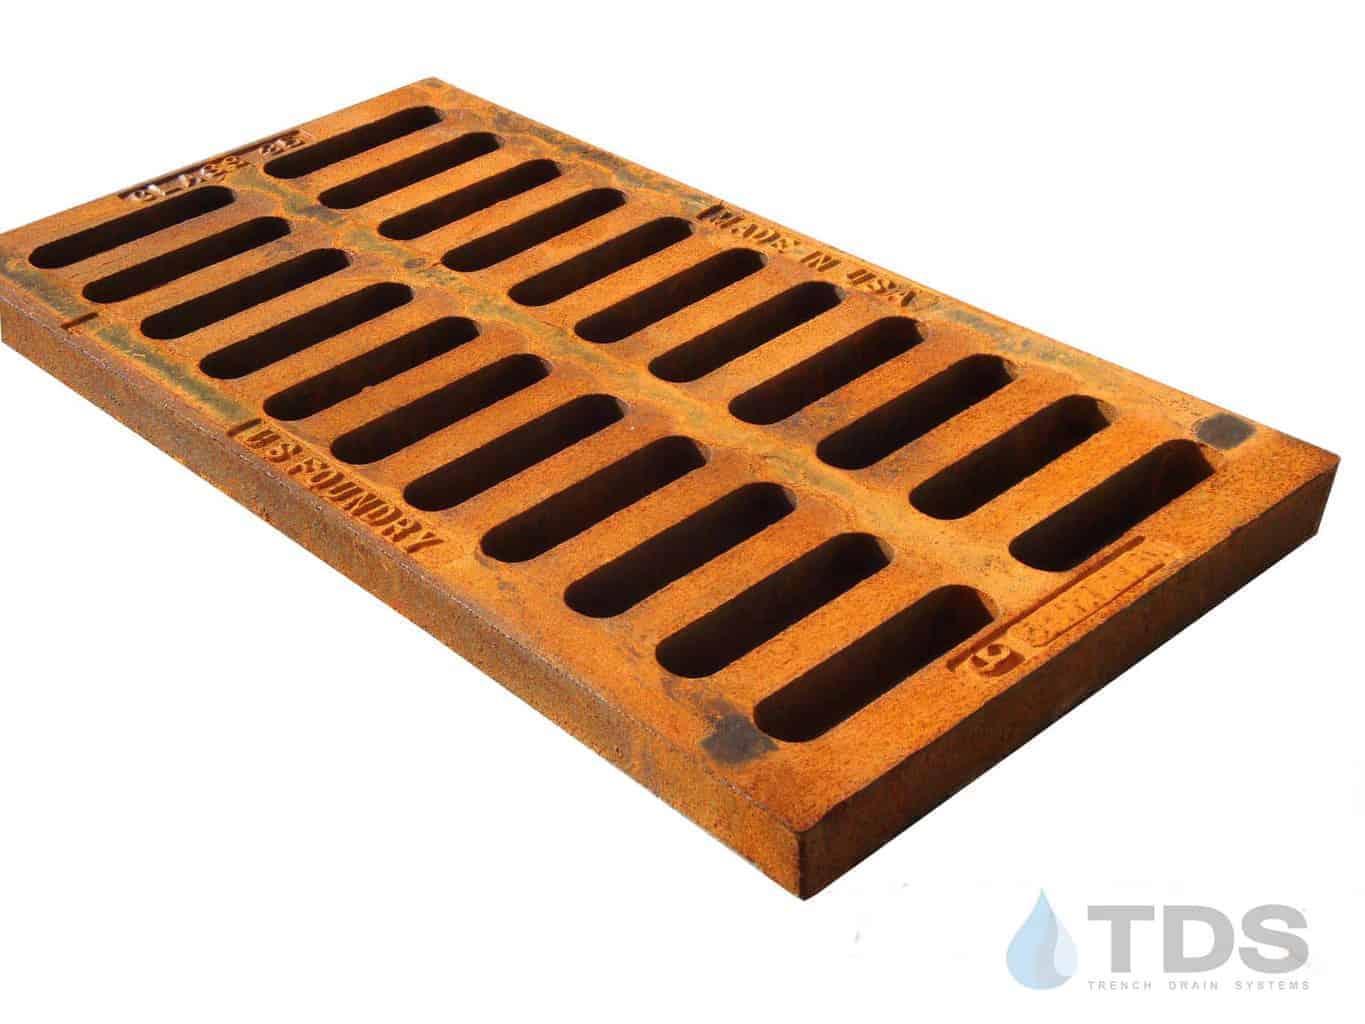 12 X 24 Cast Iron Hd Grate Replacement Grating